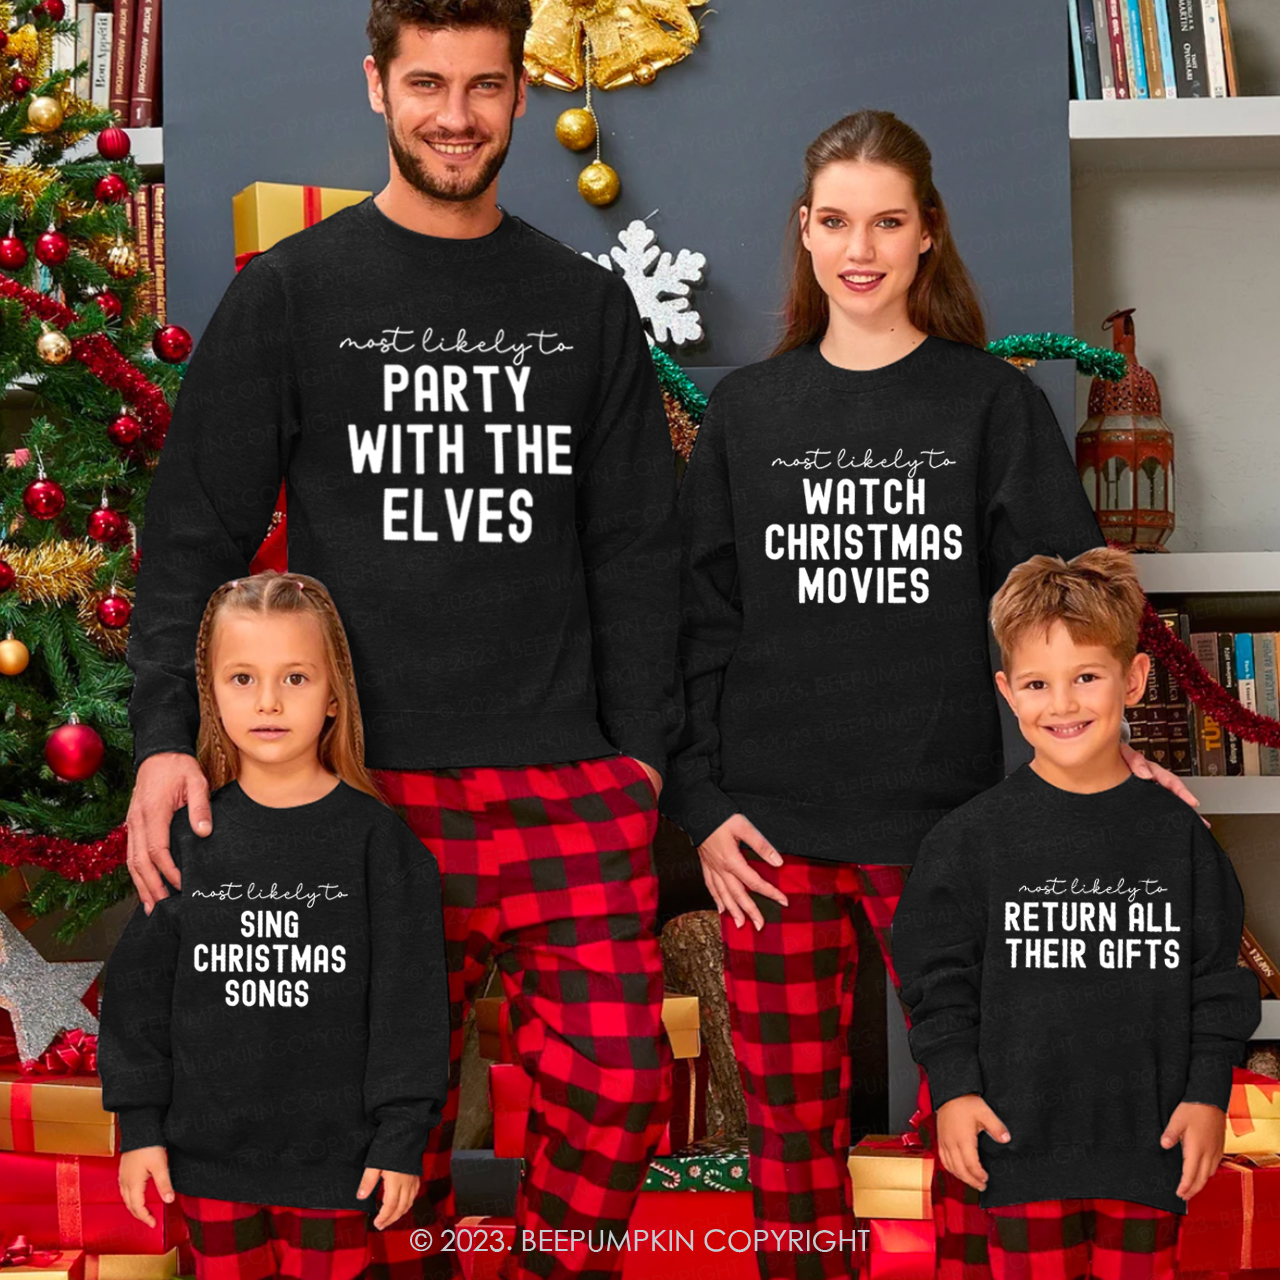 Family Christmas Shirts Most Likely To Funny Party Sweatshirts